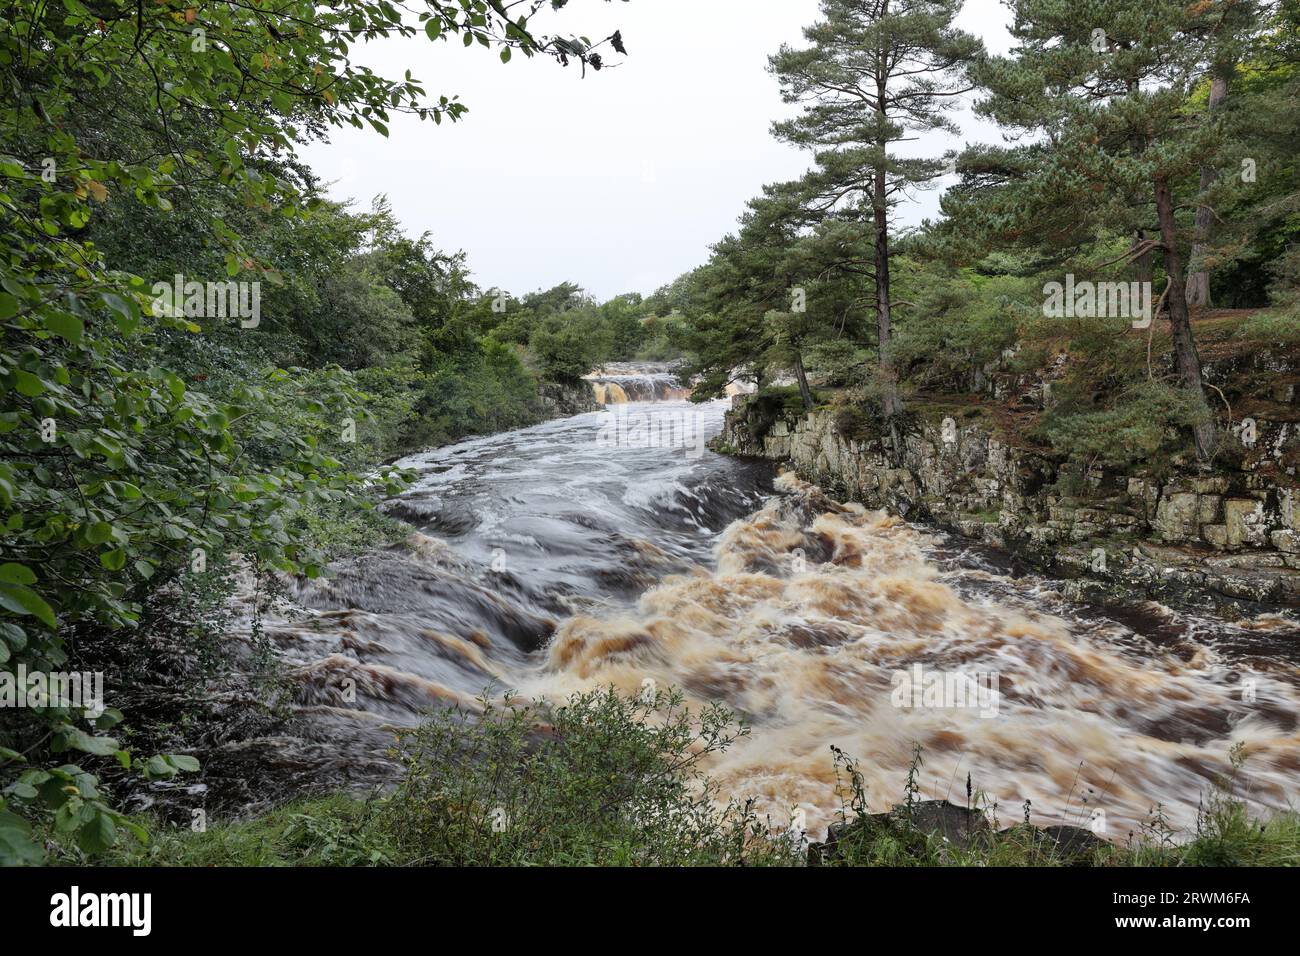 Low Force in Flood after the Remnants of Ex Hurricane Lee Brought Heavy Rain to the Area, River Tees, Bowlees, Teesdale, County Durham, UK Stock Photo